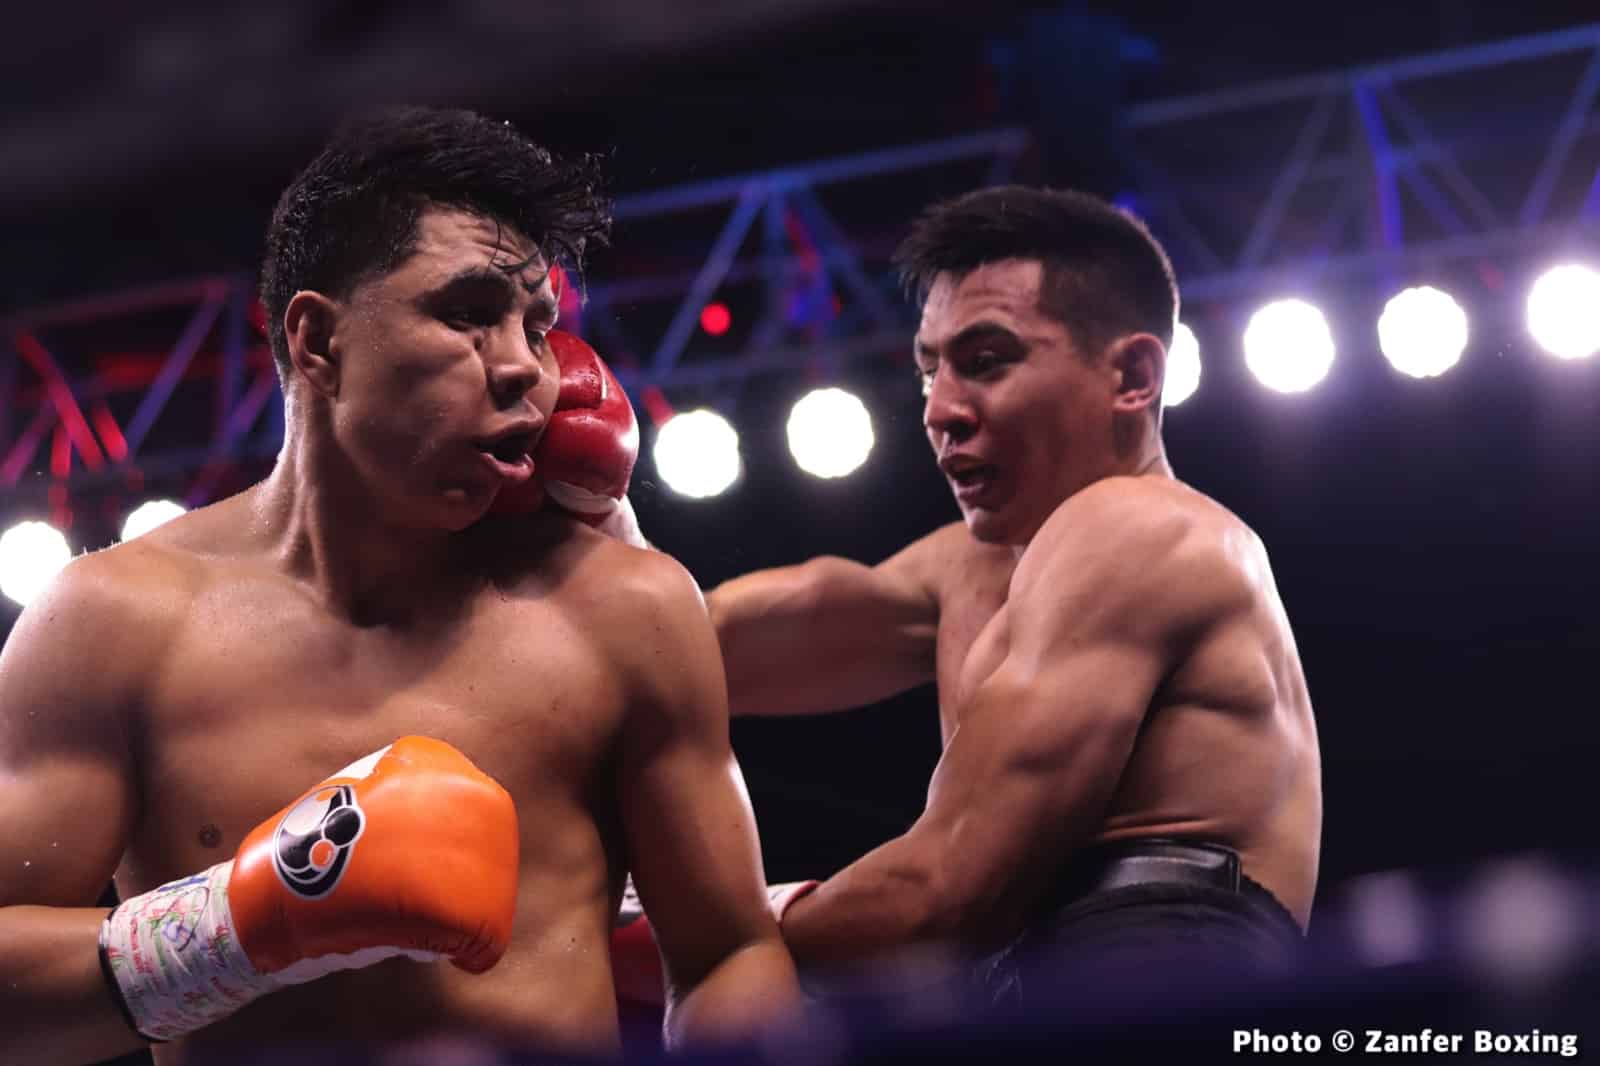 Jaime Munguia stops Gonzalo Coria in 3rd - Boxing Results